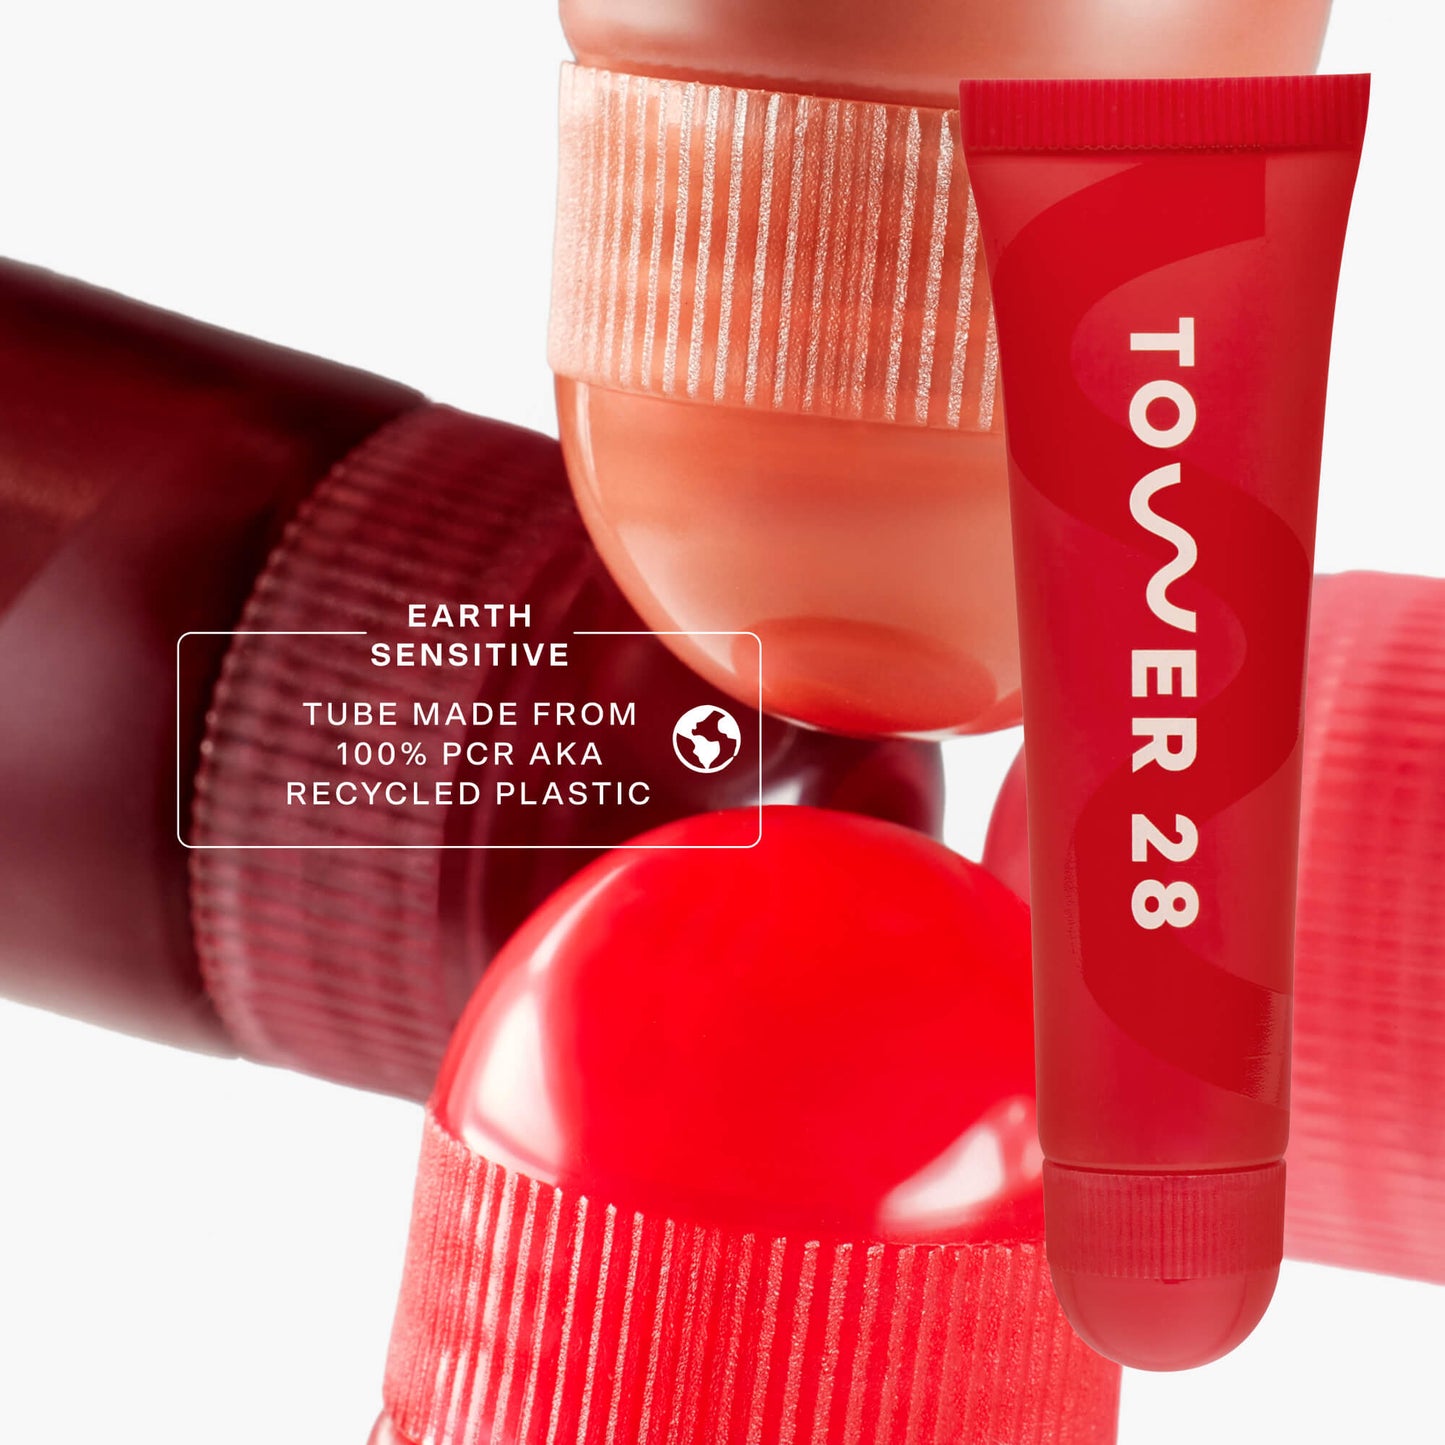 [Tower 28 Beauty LipSoftie™ Lip Treatment in Blood Orange Vanilla has 100% recycled plastic packaging.]